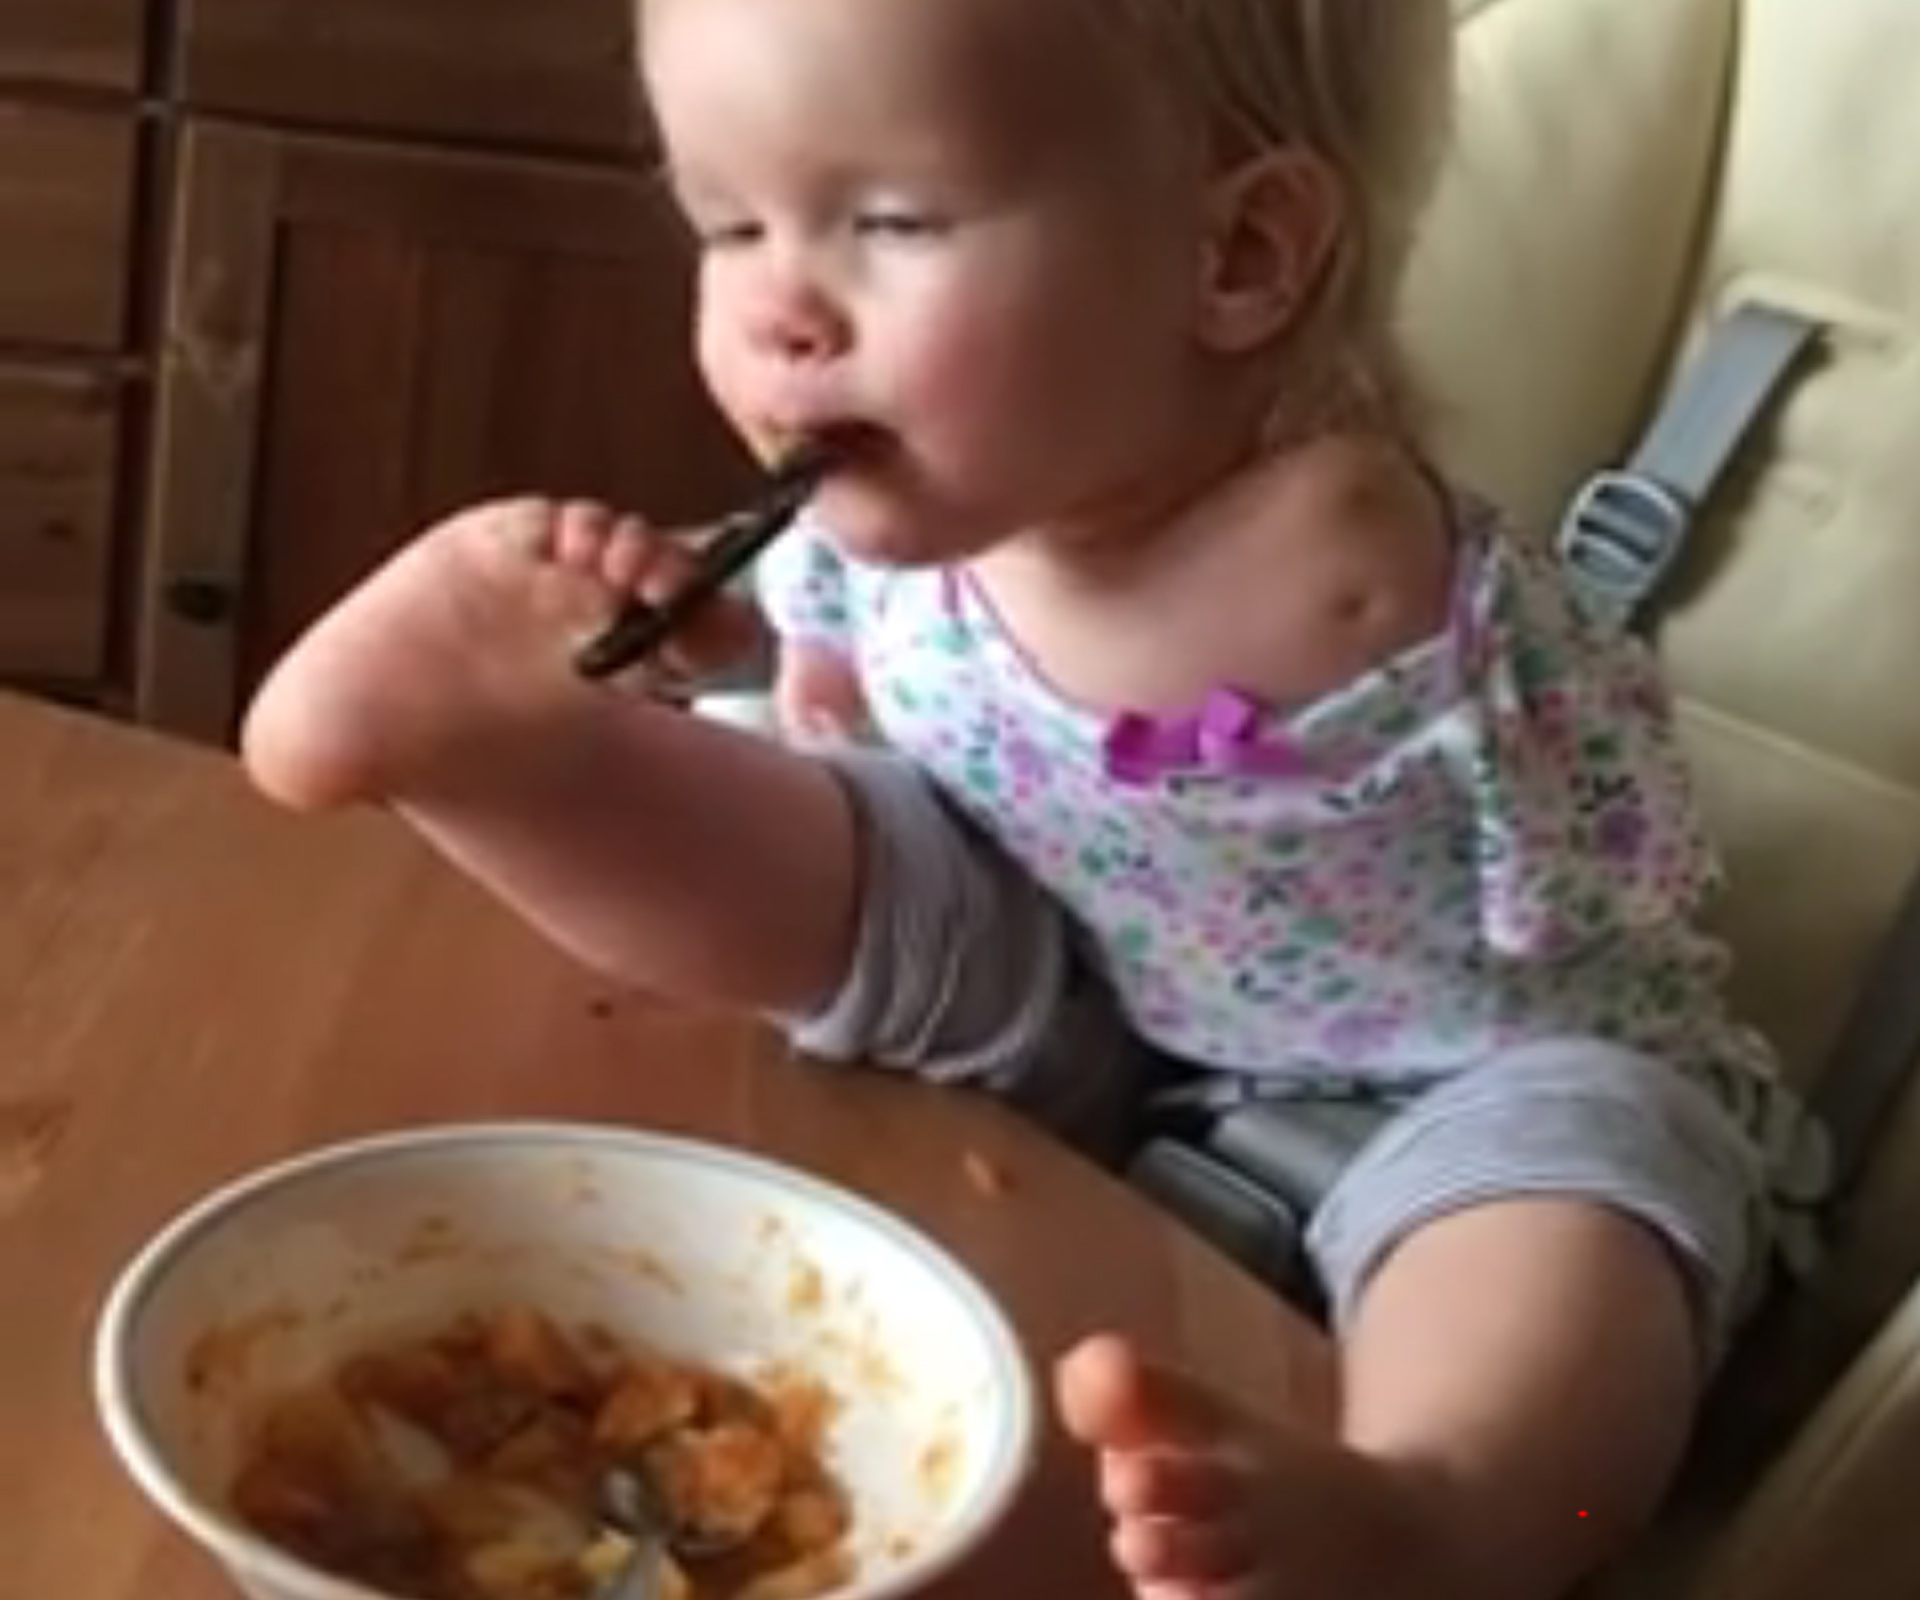 Inspiring little girl with no arms teaches herself to eat with her feet